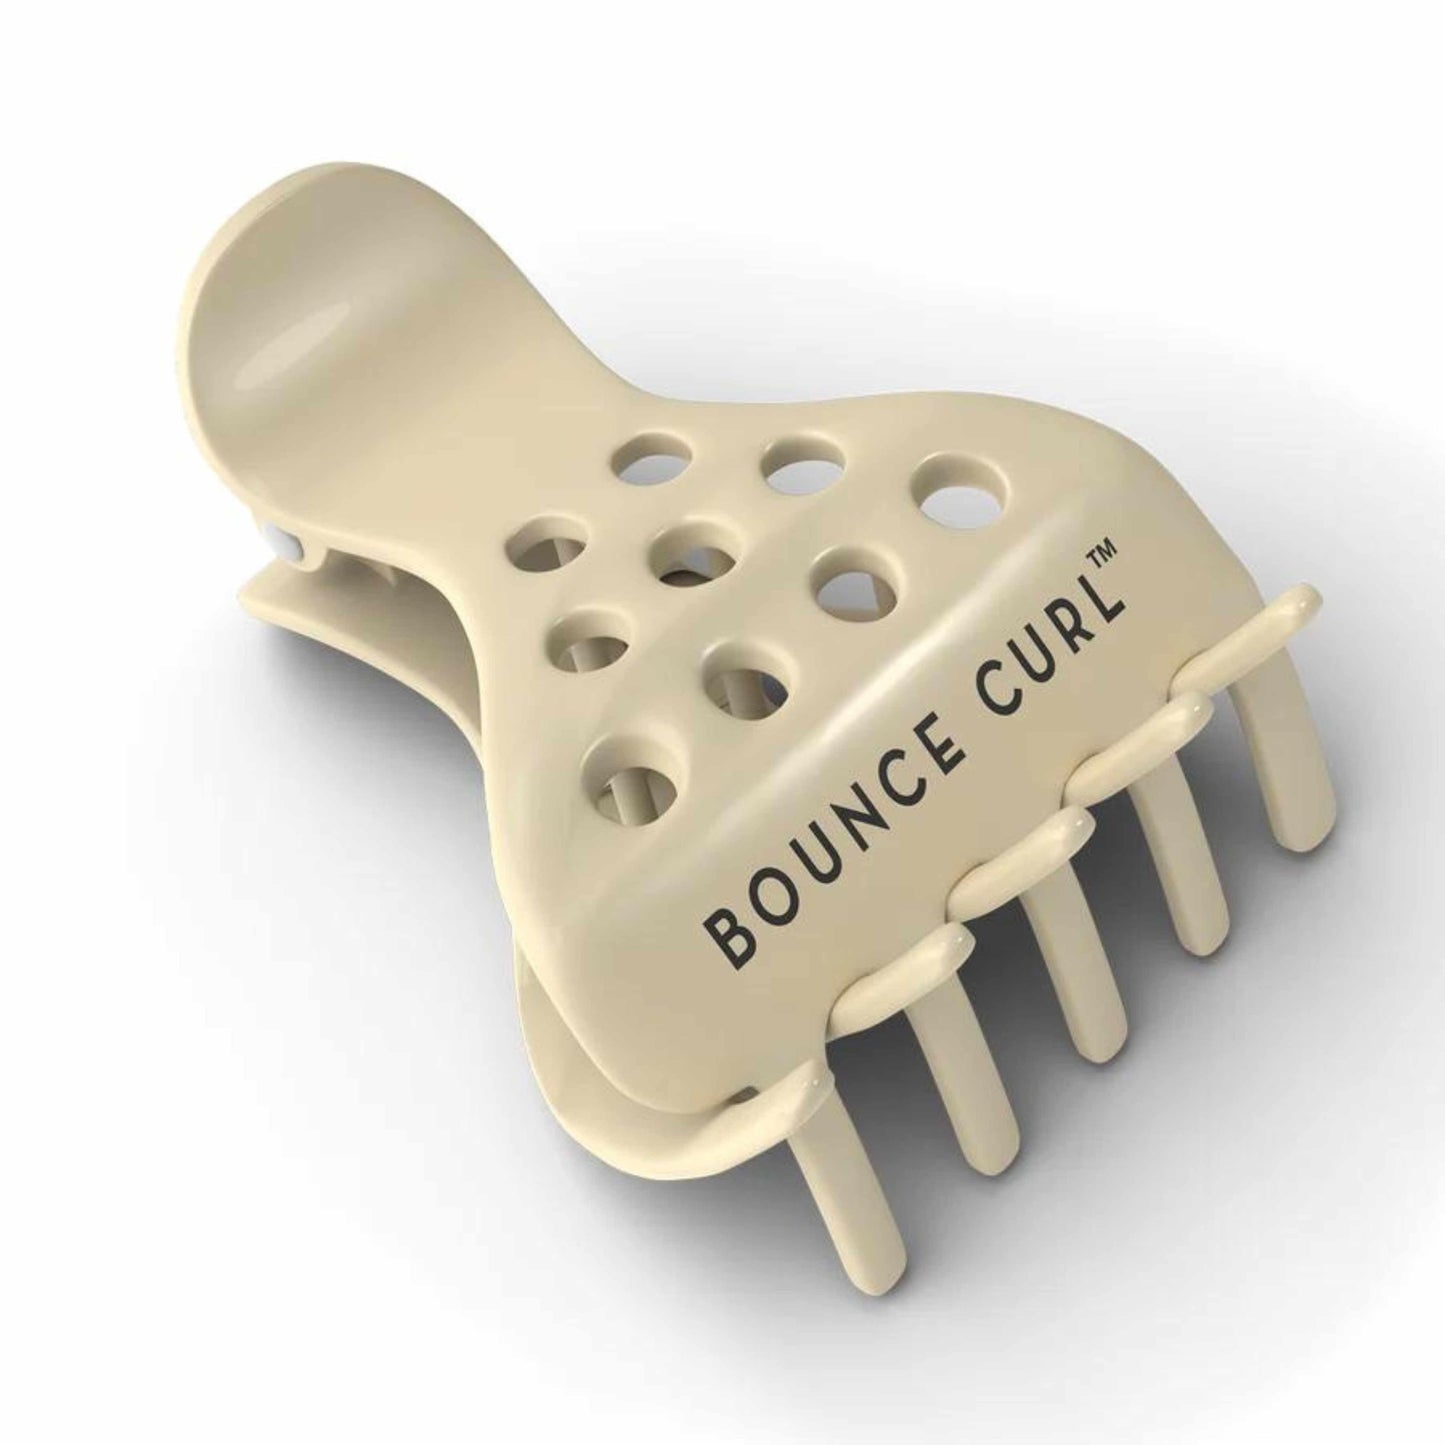 Bounce Curl Volume Root Clips